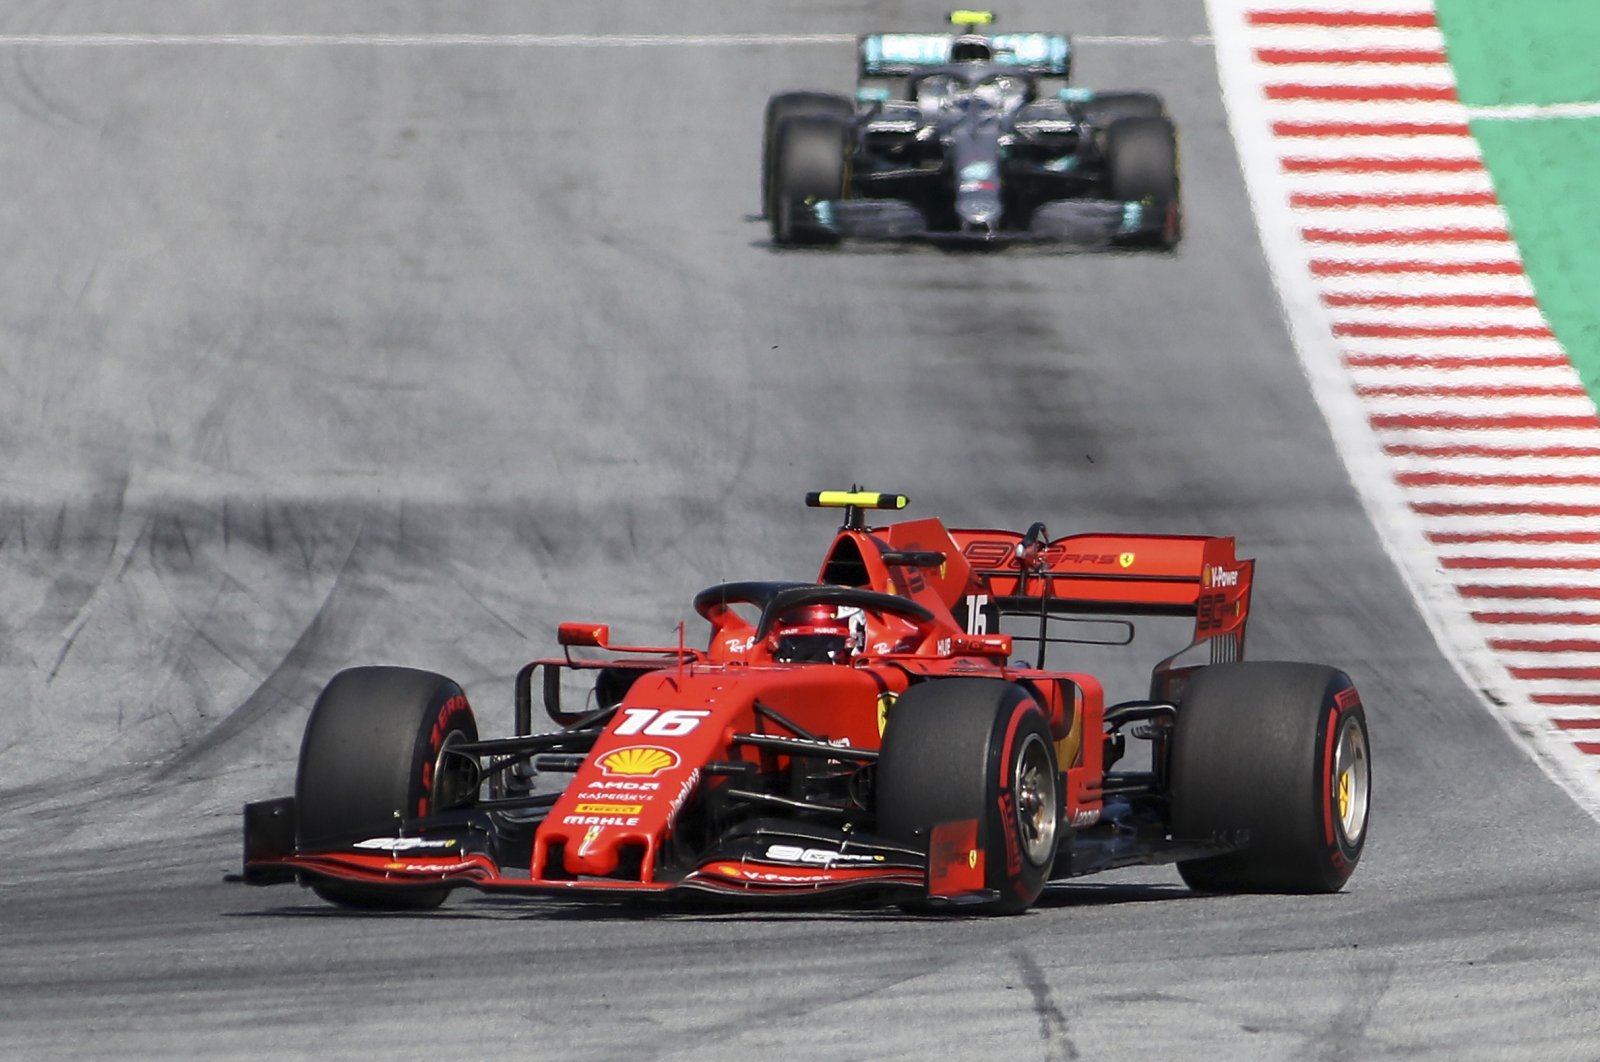 Ferrari driver Charles Leclerc of Monaco leads during the Austrian Formula One Grand Prix at the Red Bull Ring racetrack in Spielberg, Austria, June 30, 2019. (AP Photo)